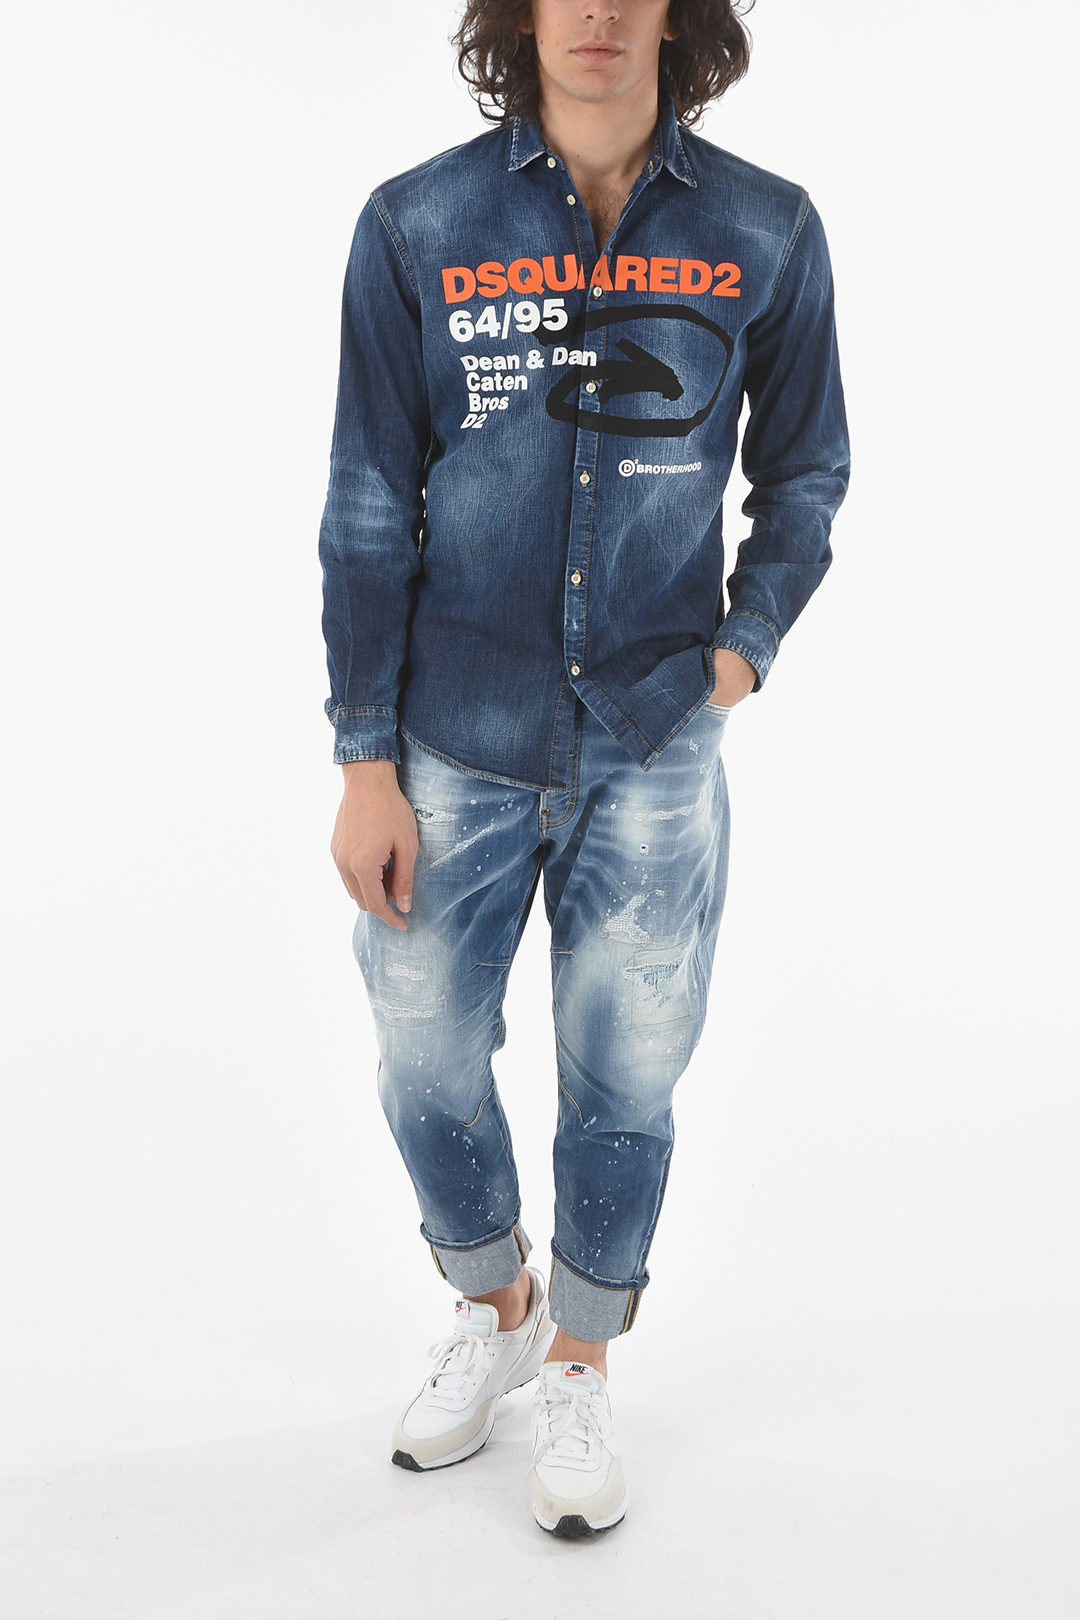 Dsquared2 Denim RELAX DAN FIT Overshirt with Maxi Print on the Front ...